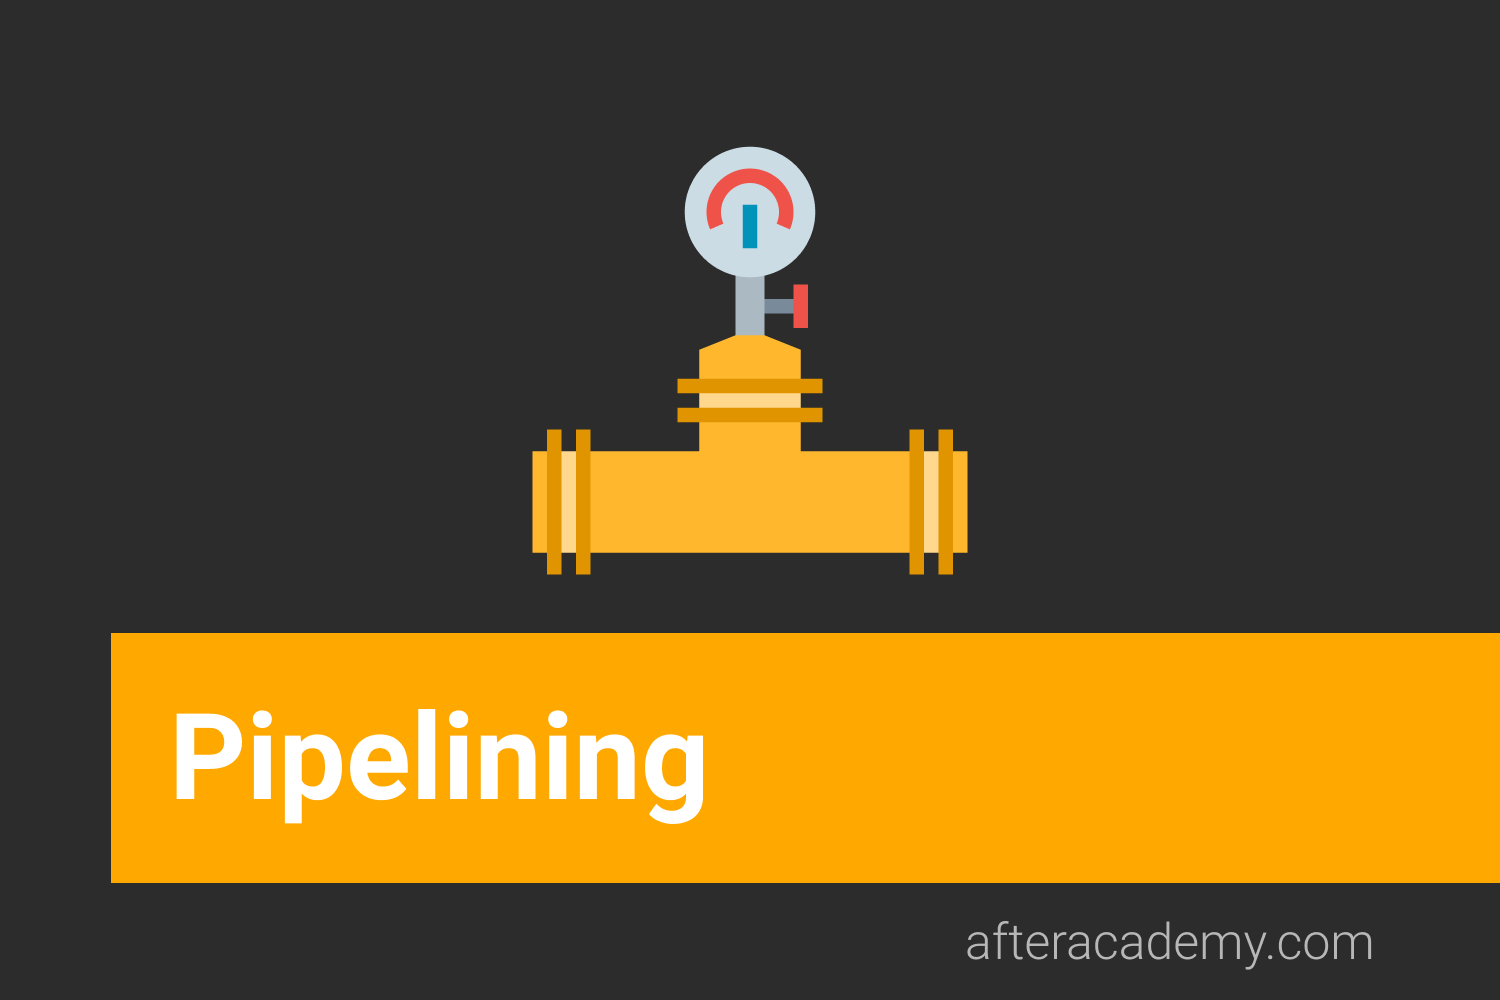 What is Pipelining?